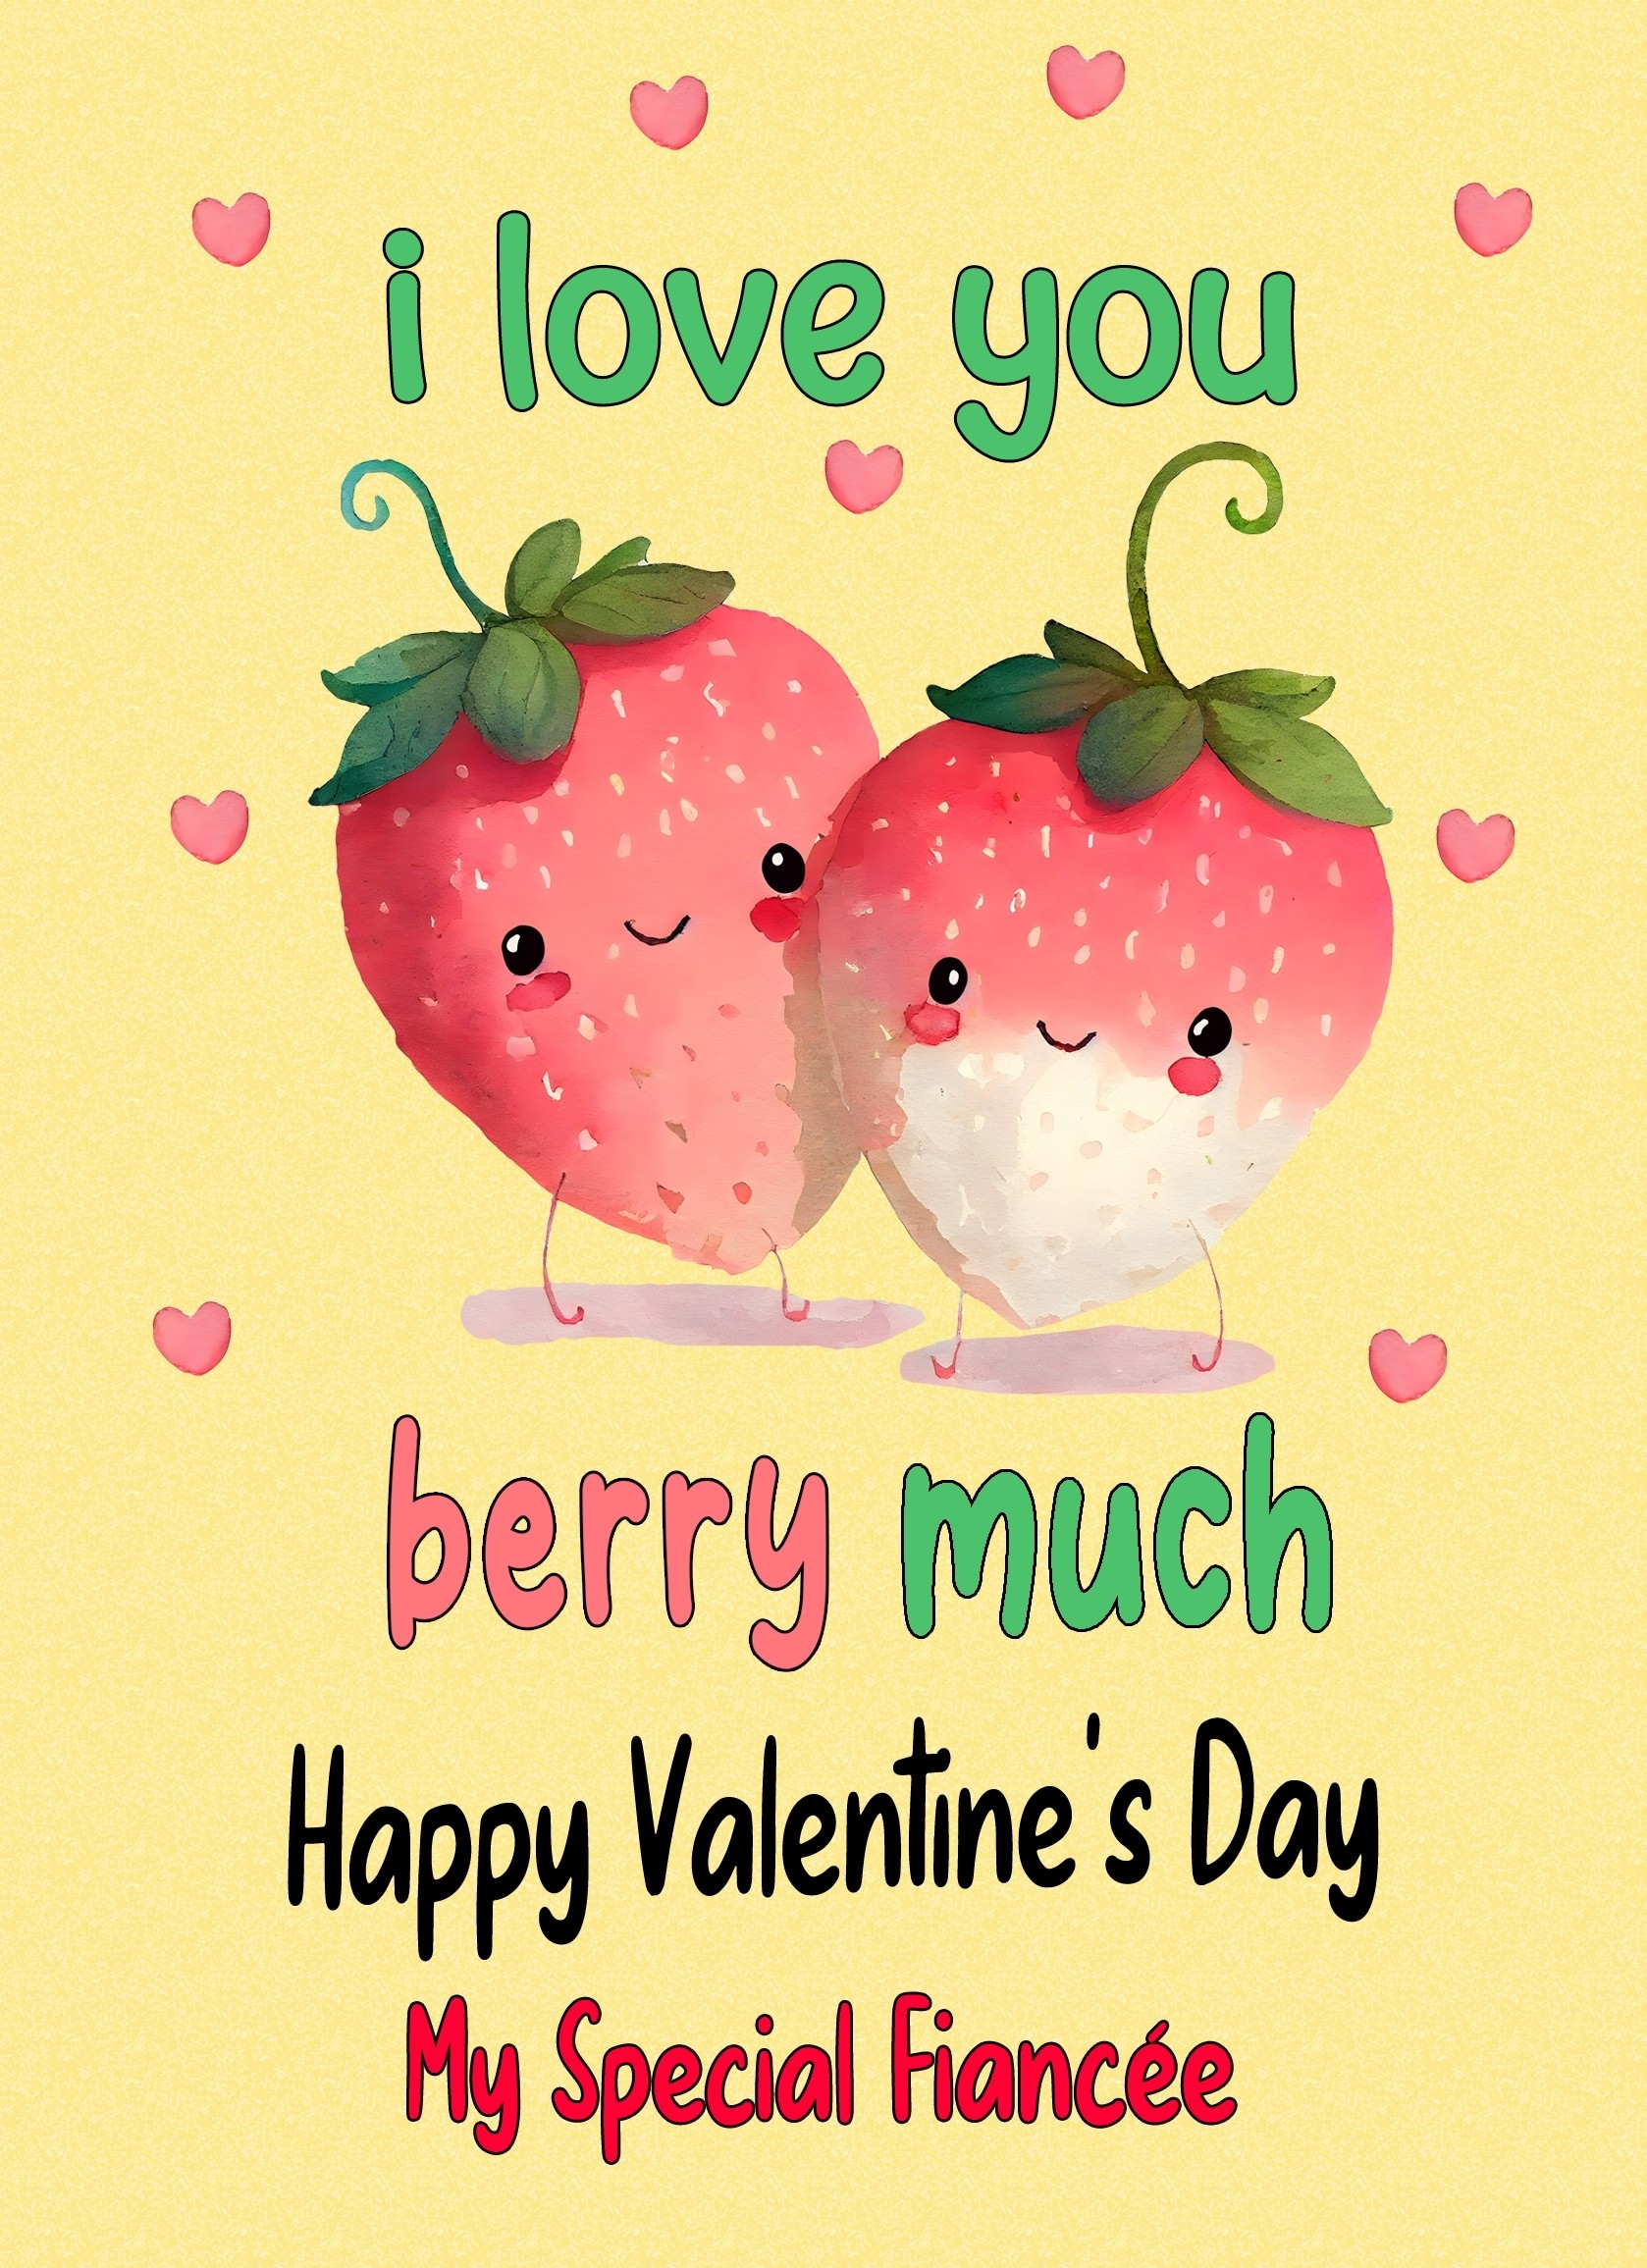 Funny Pun Valentines Day Card for Fiancee (Berry Much)